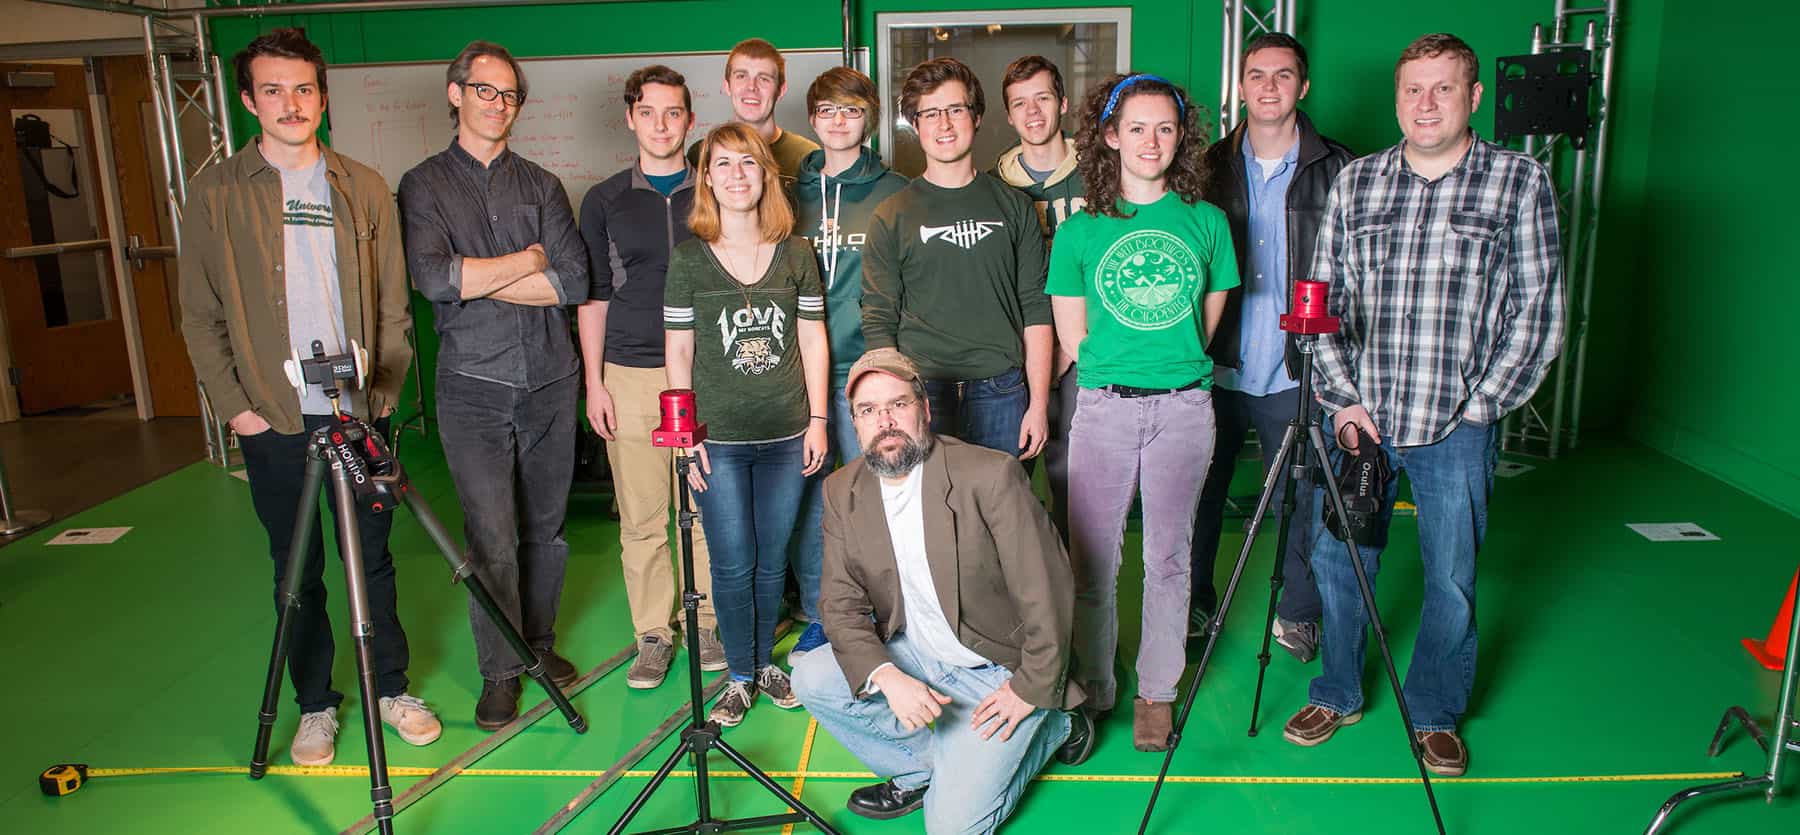 Members of the GRID Lab pose for a picture in front of a green screen.